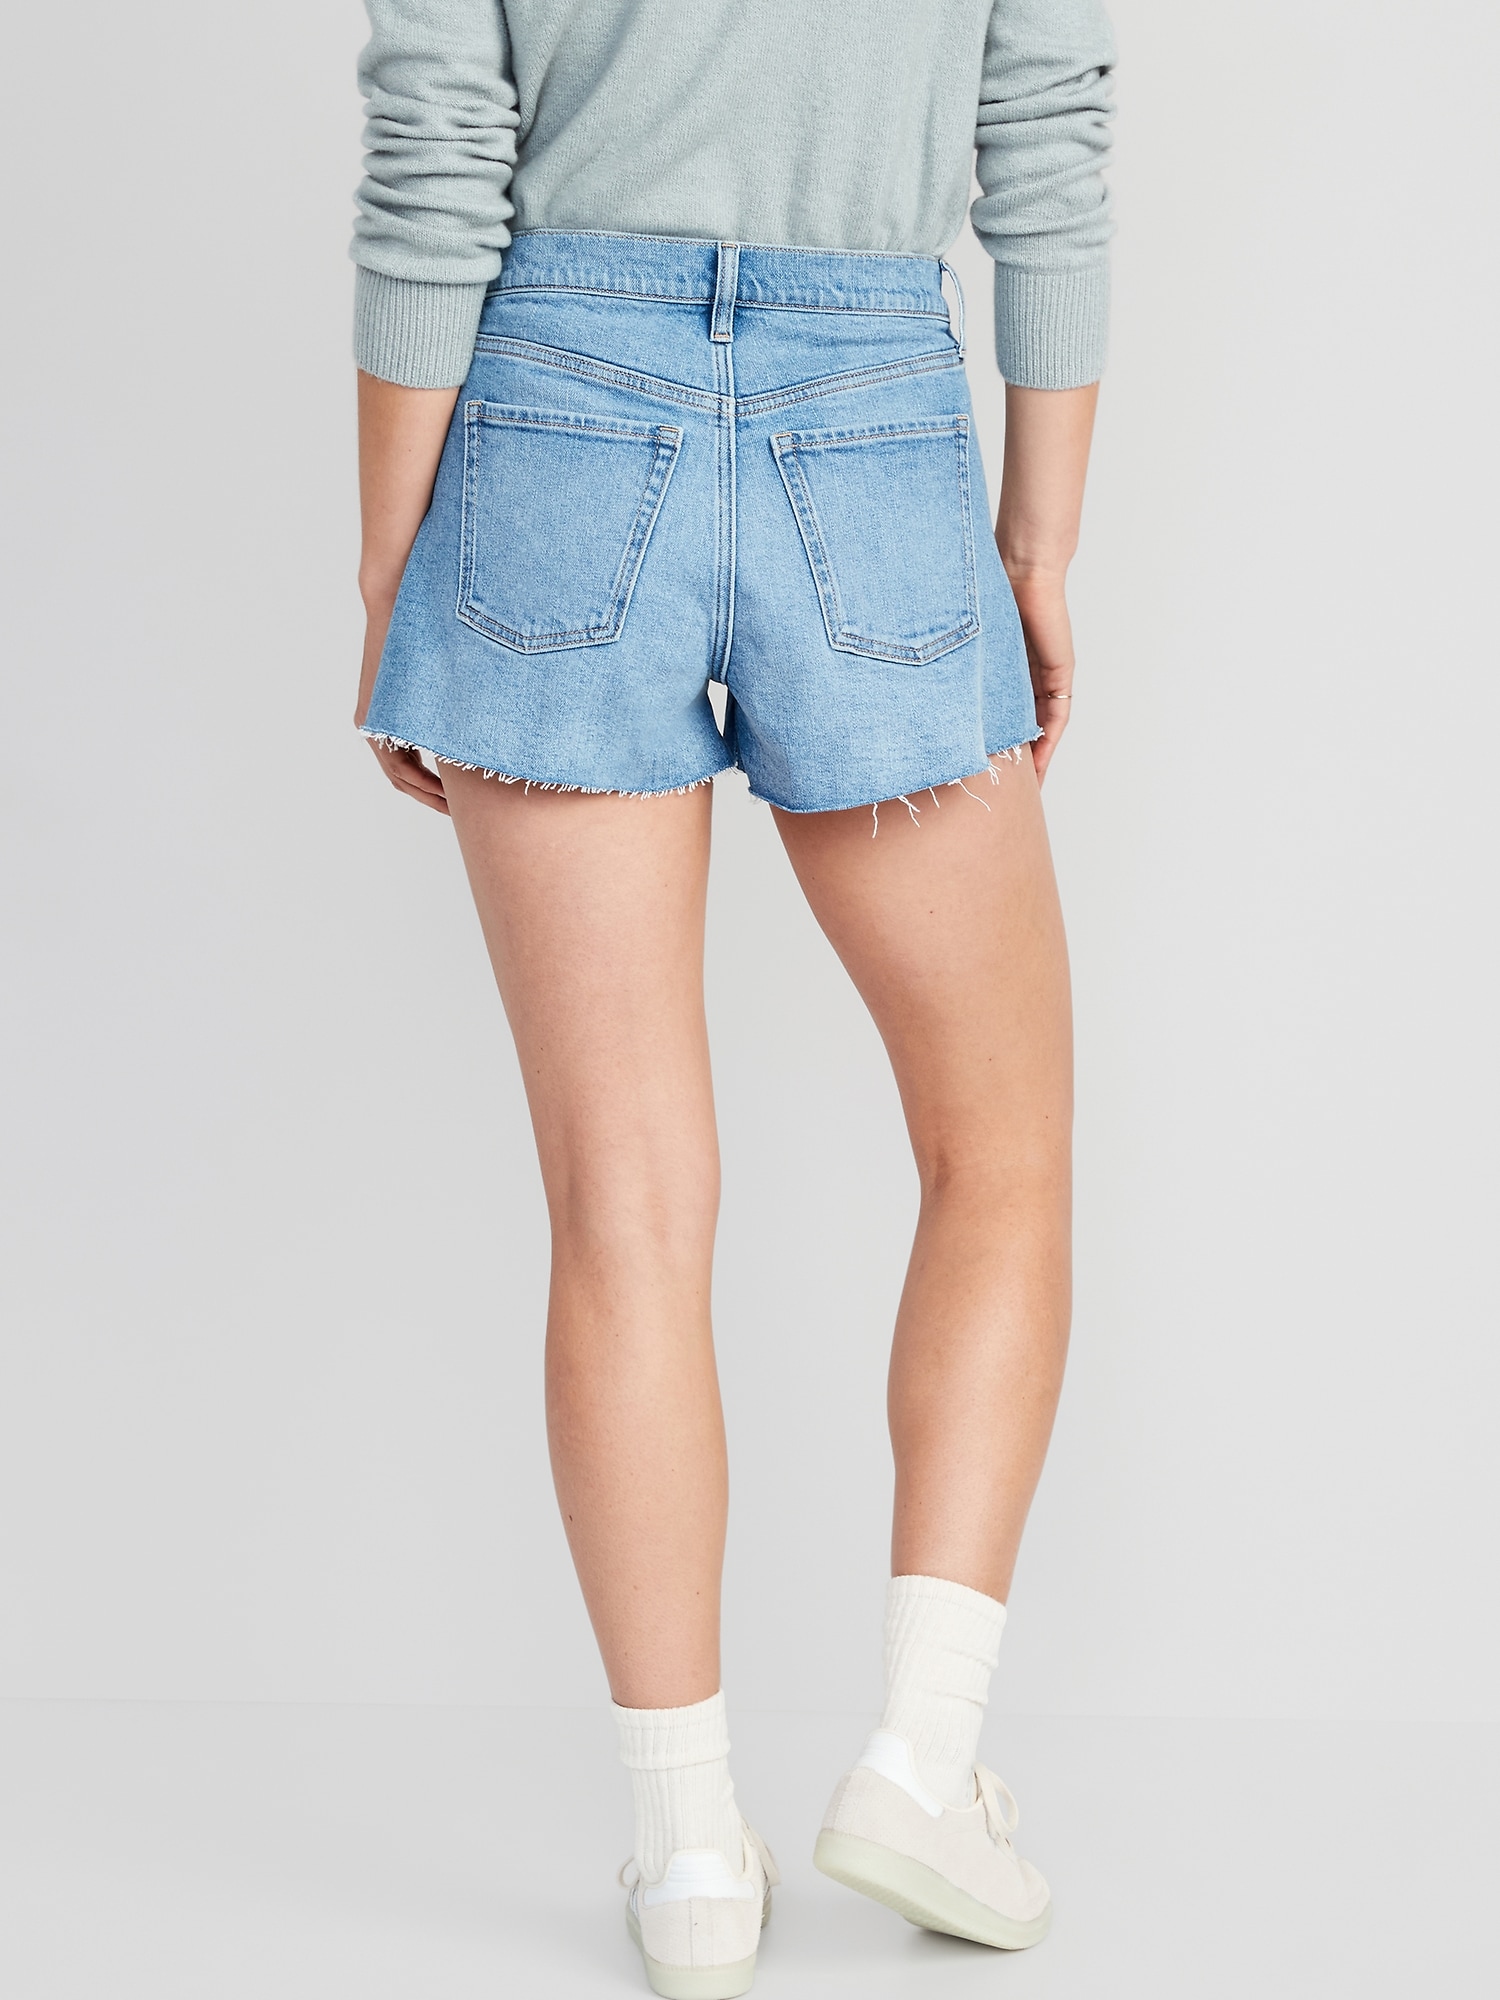 Higher High-Waisted Button-Fly A-Line Cutoff Jean Shorts for Women